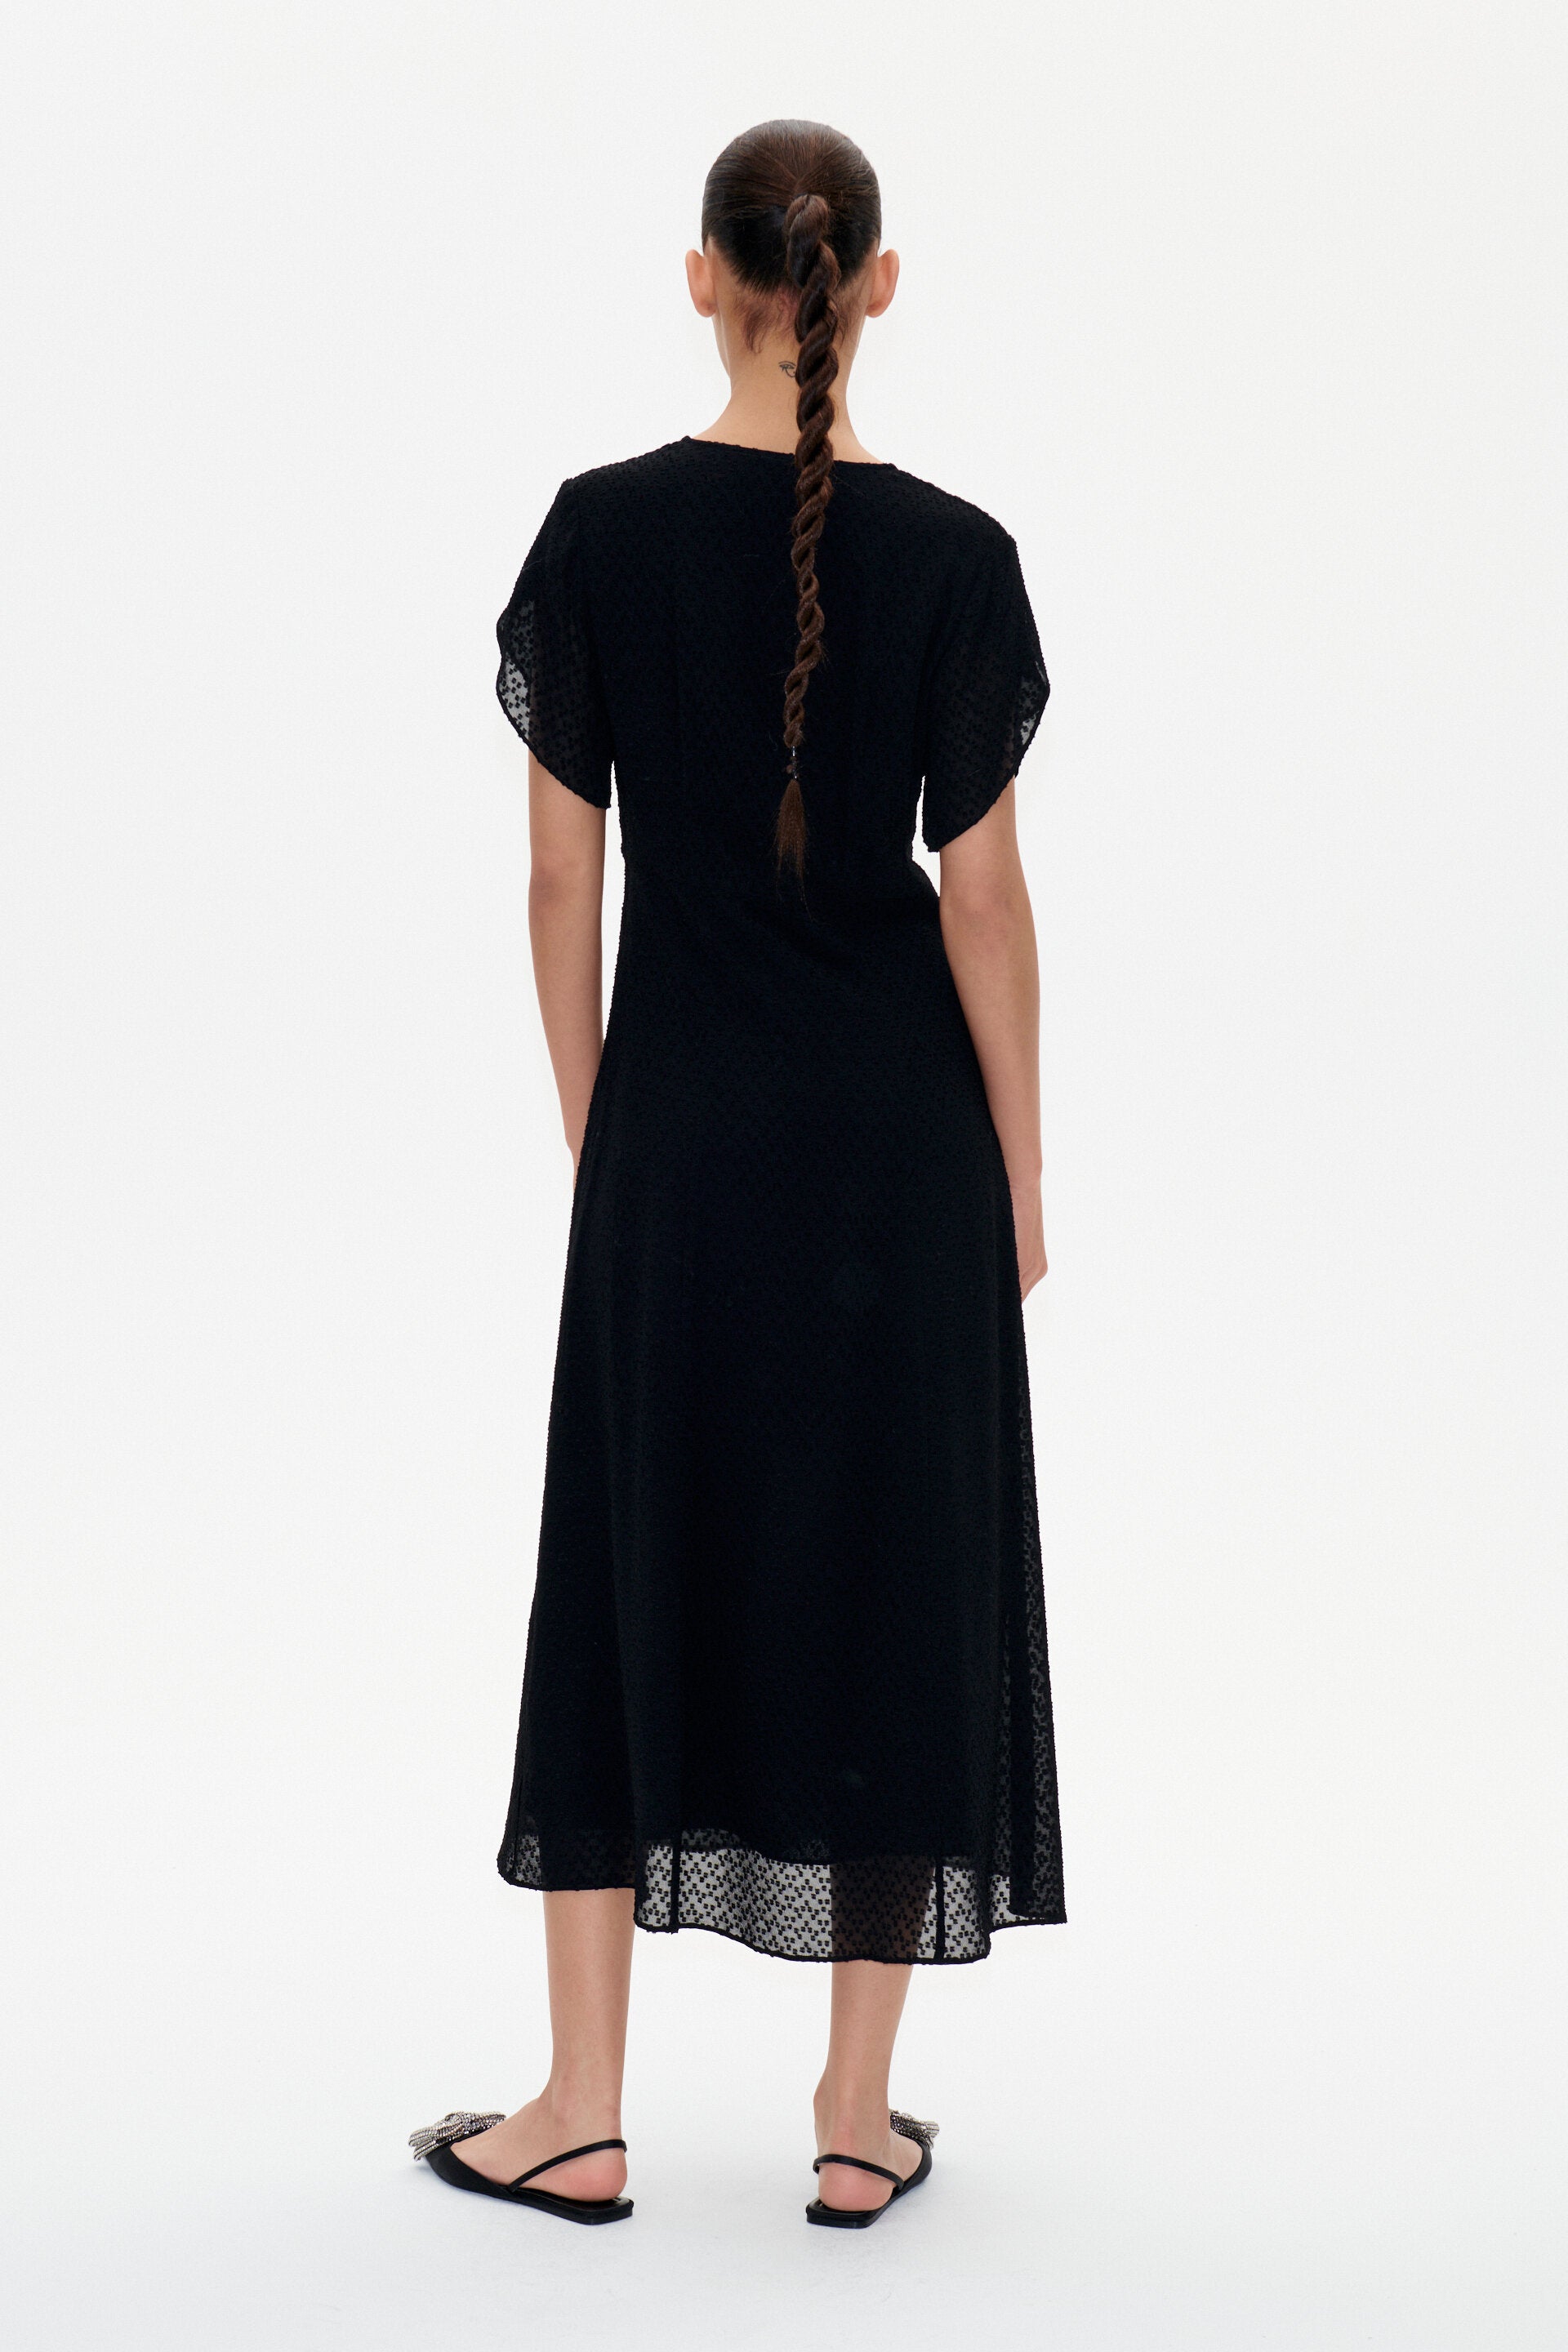 Black V neck midi dress with short tulip sleeves and a textured fabric